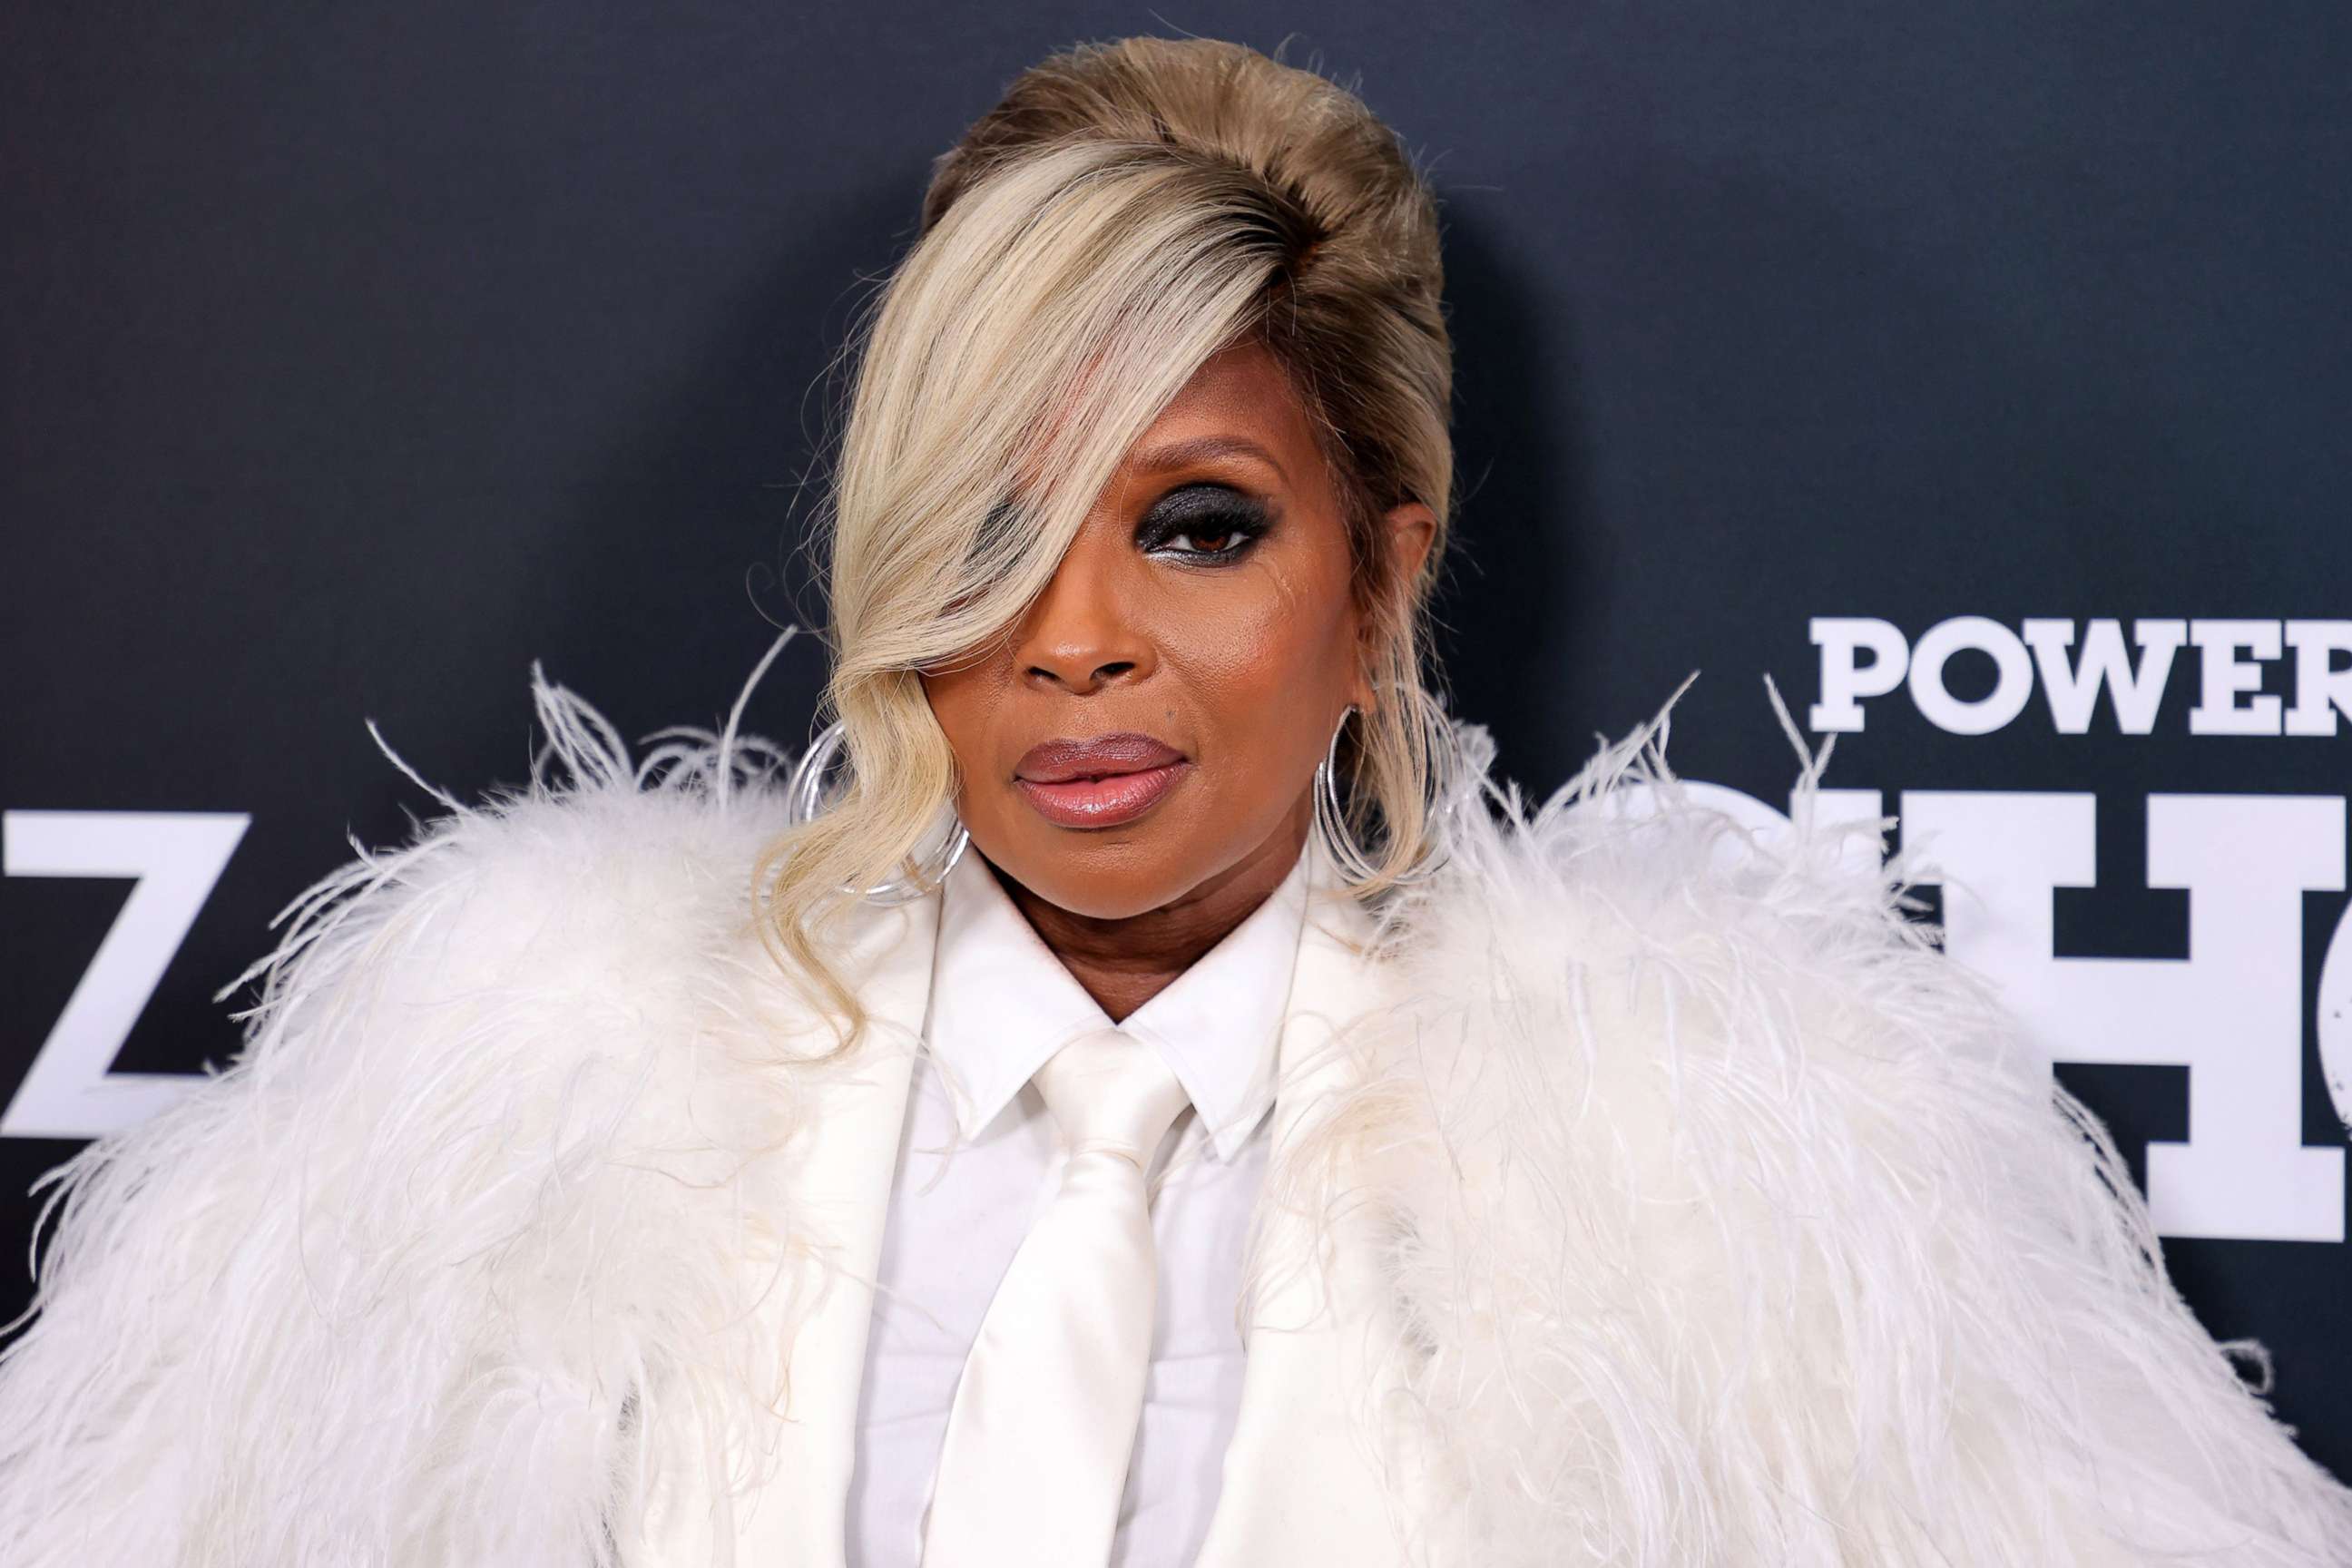 PHOTO: Mary J. Blige attends the "Power Book II: Ghost" Season 2 Premiere at SVA Theater on Nov. 17, 2021 in New York City.